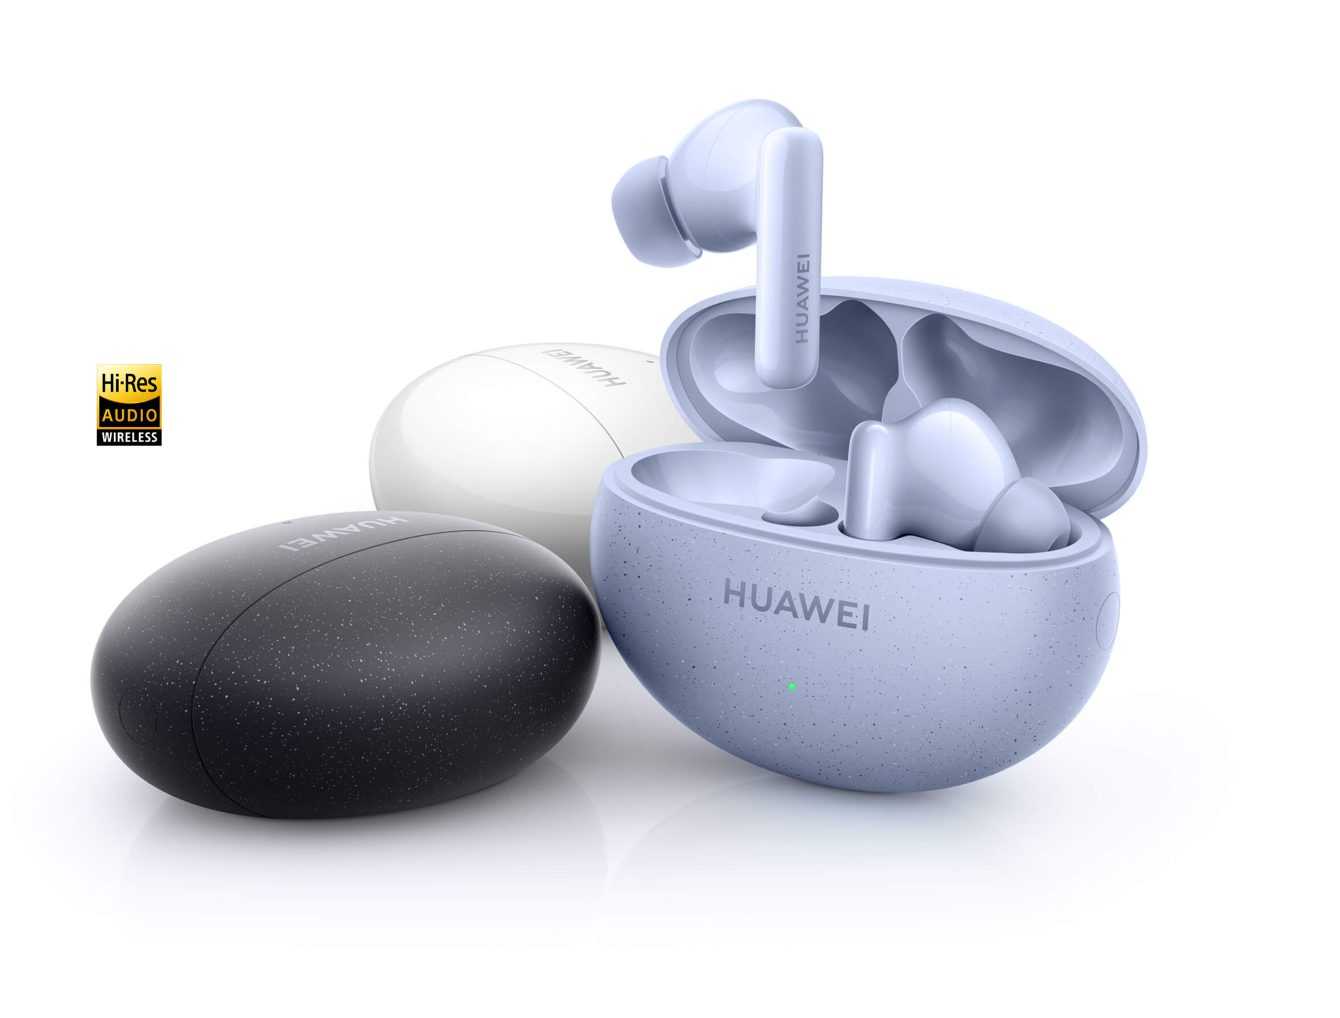 HUAWEI: here are the special offers for Father's Day